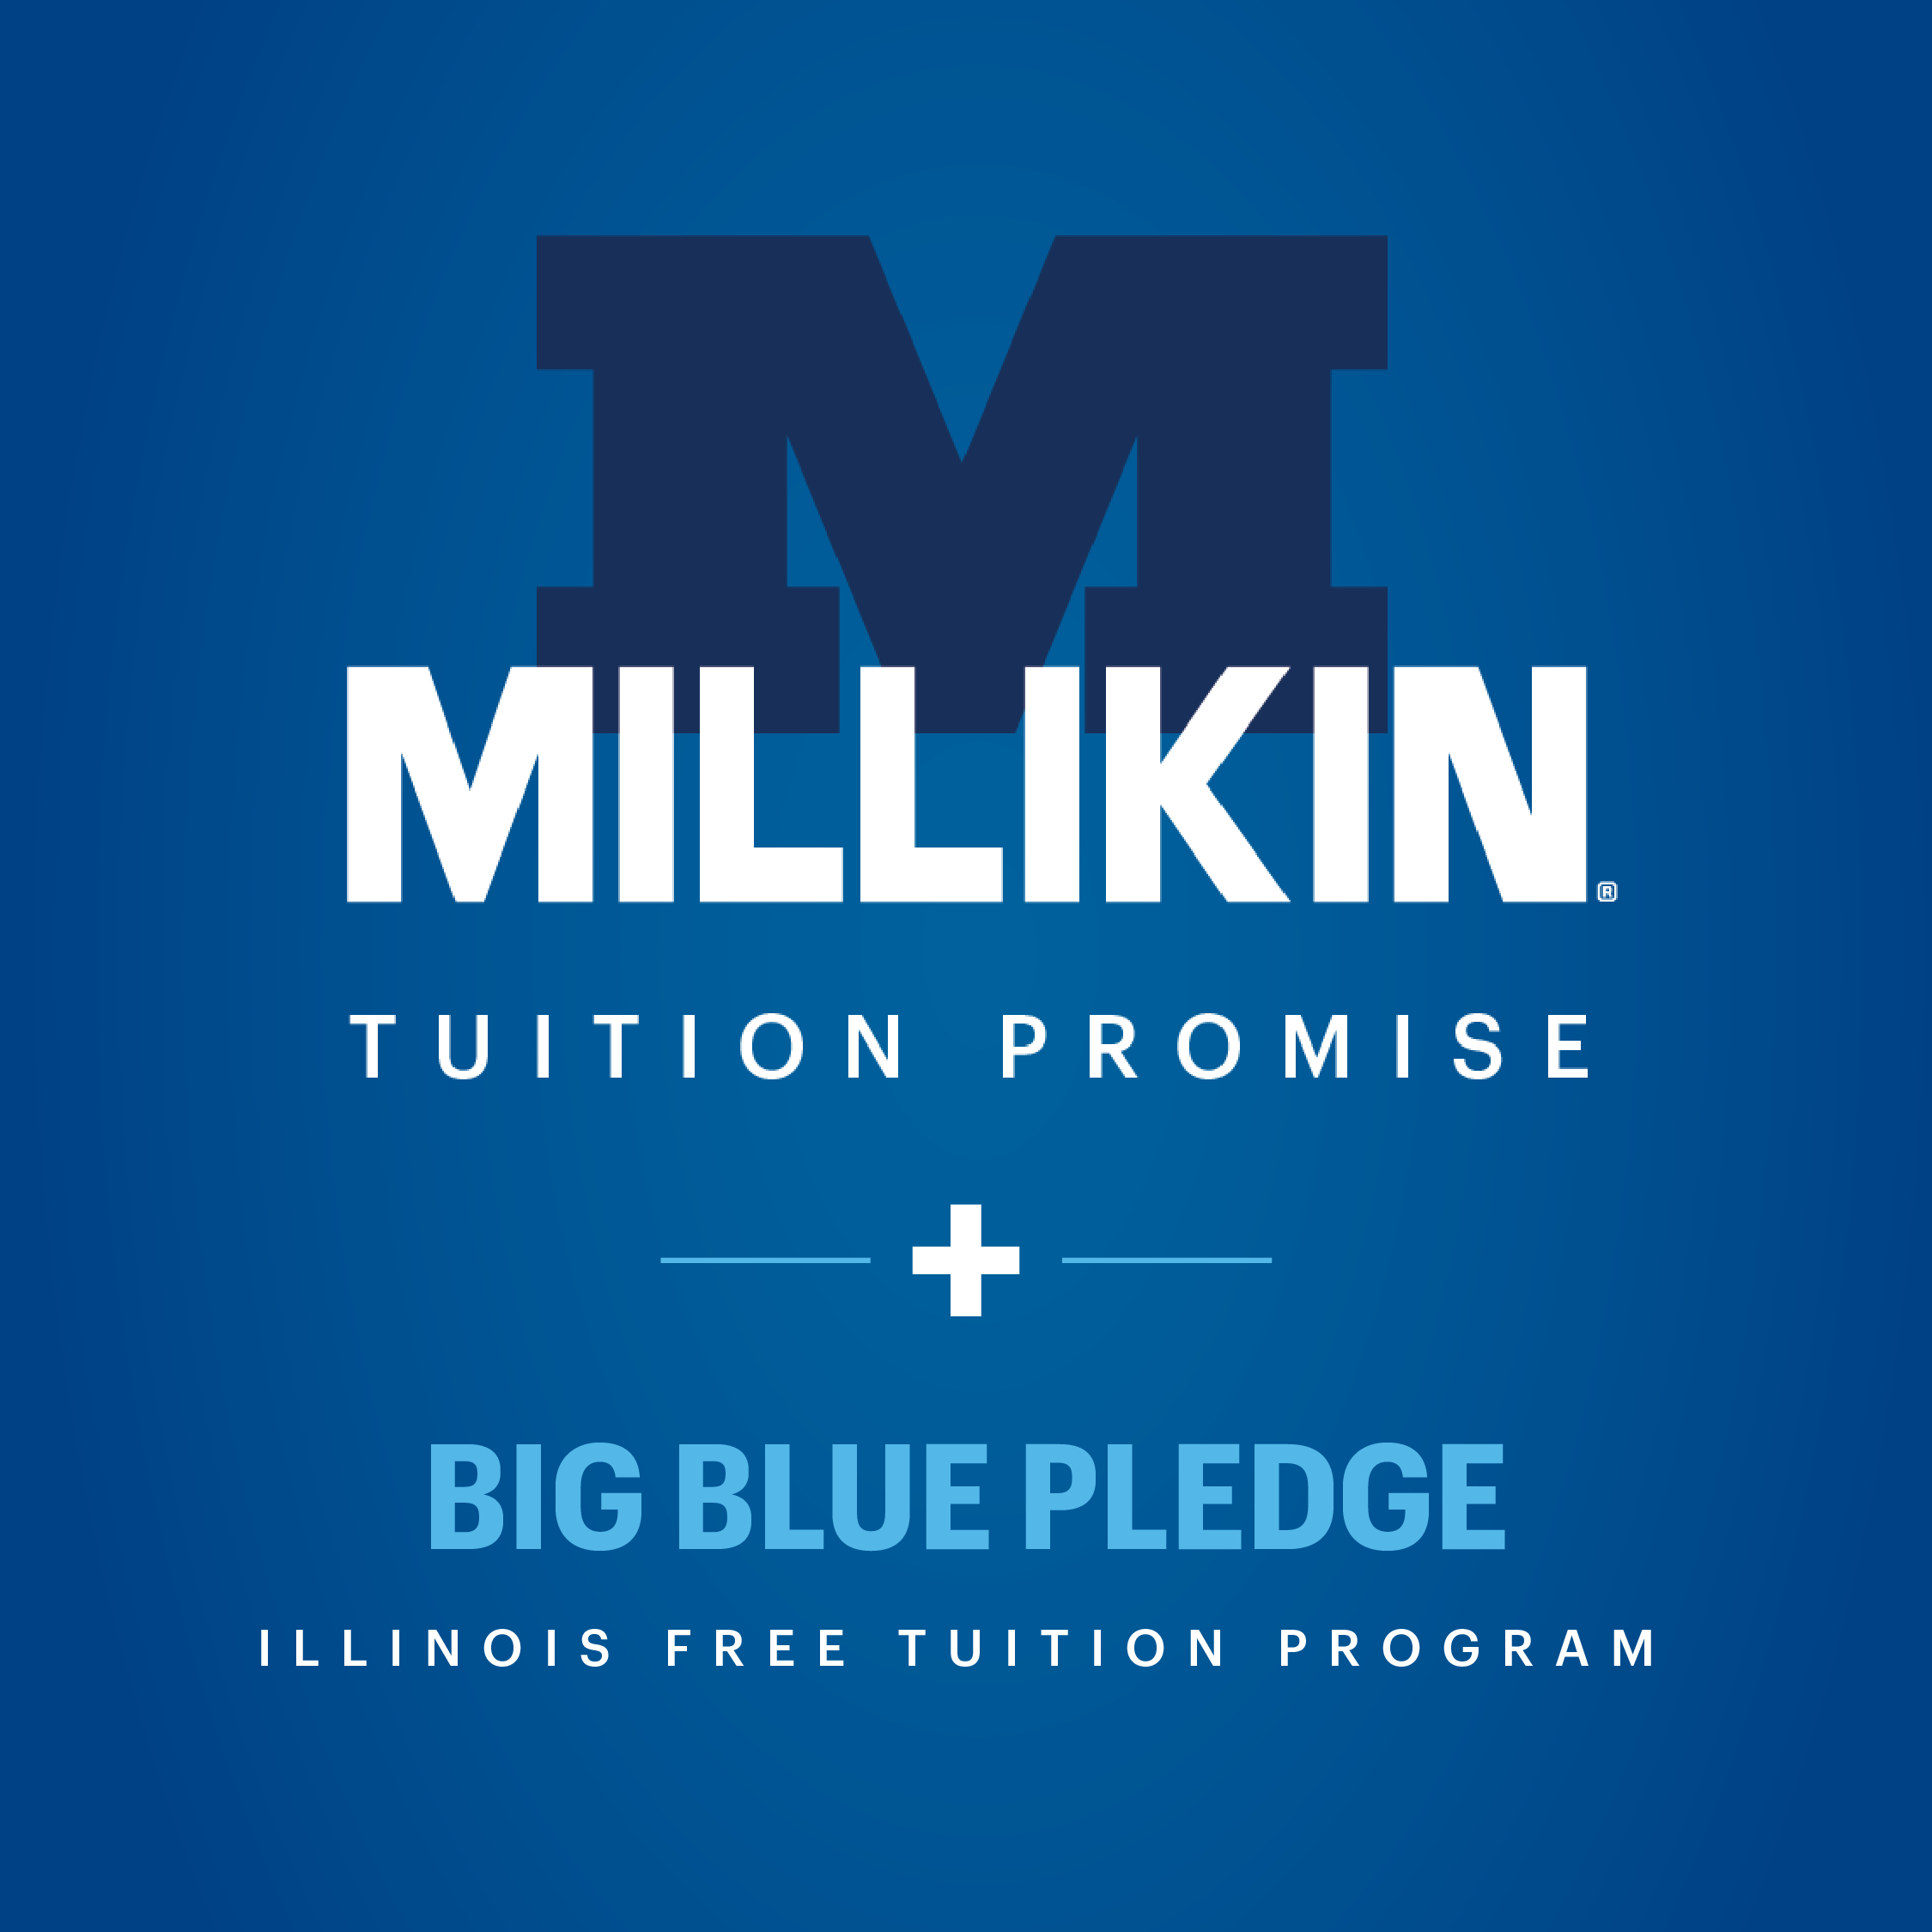 Tuition Promise and Big Blue Pledge